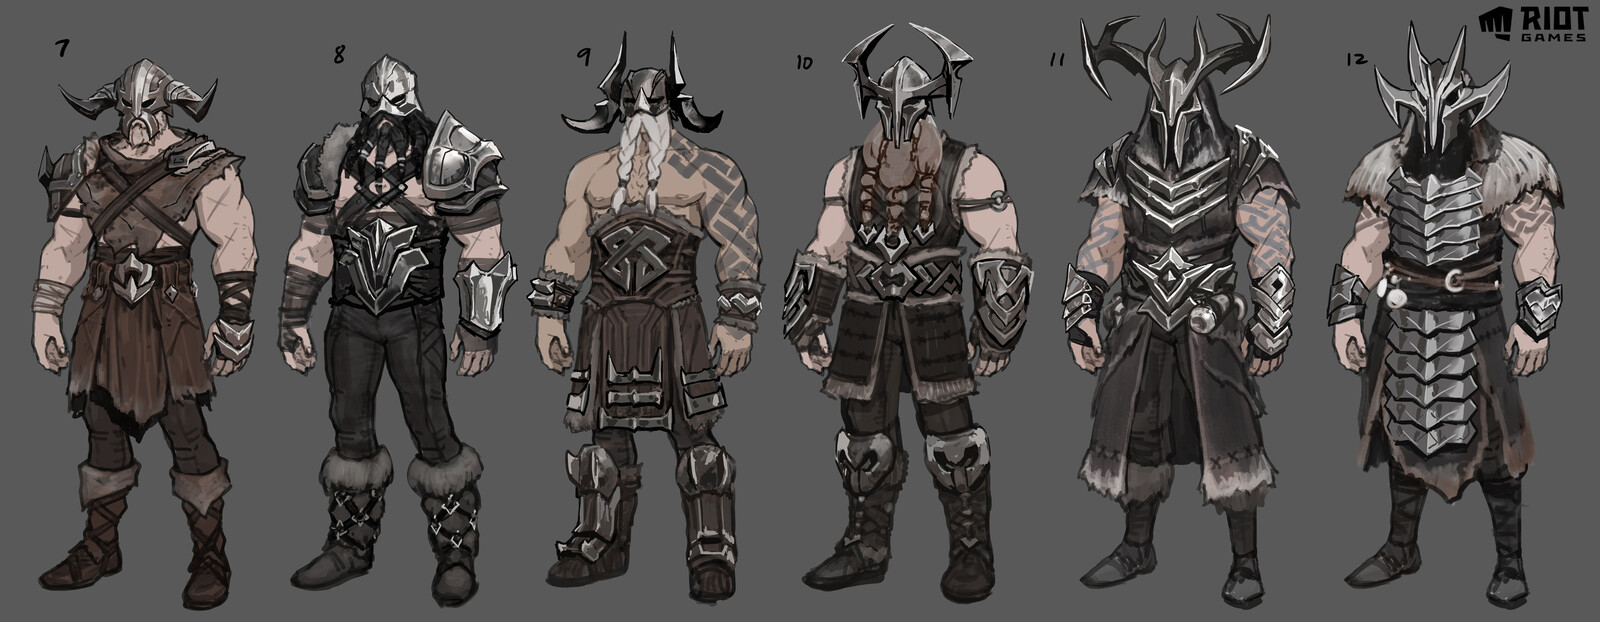 Freljordian concepts.  These are meant to be mix and match pieces so that we could recombine to create unique background characters.